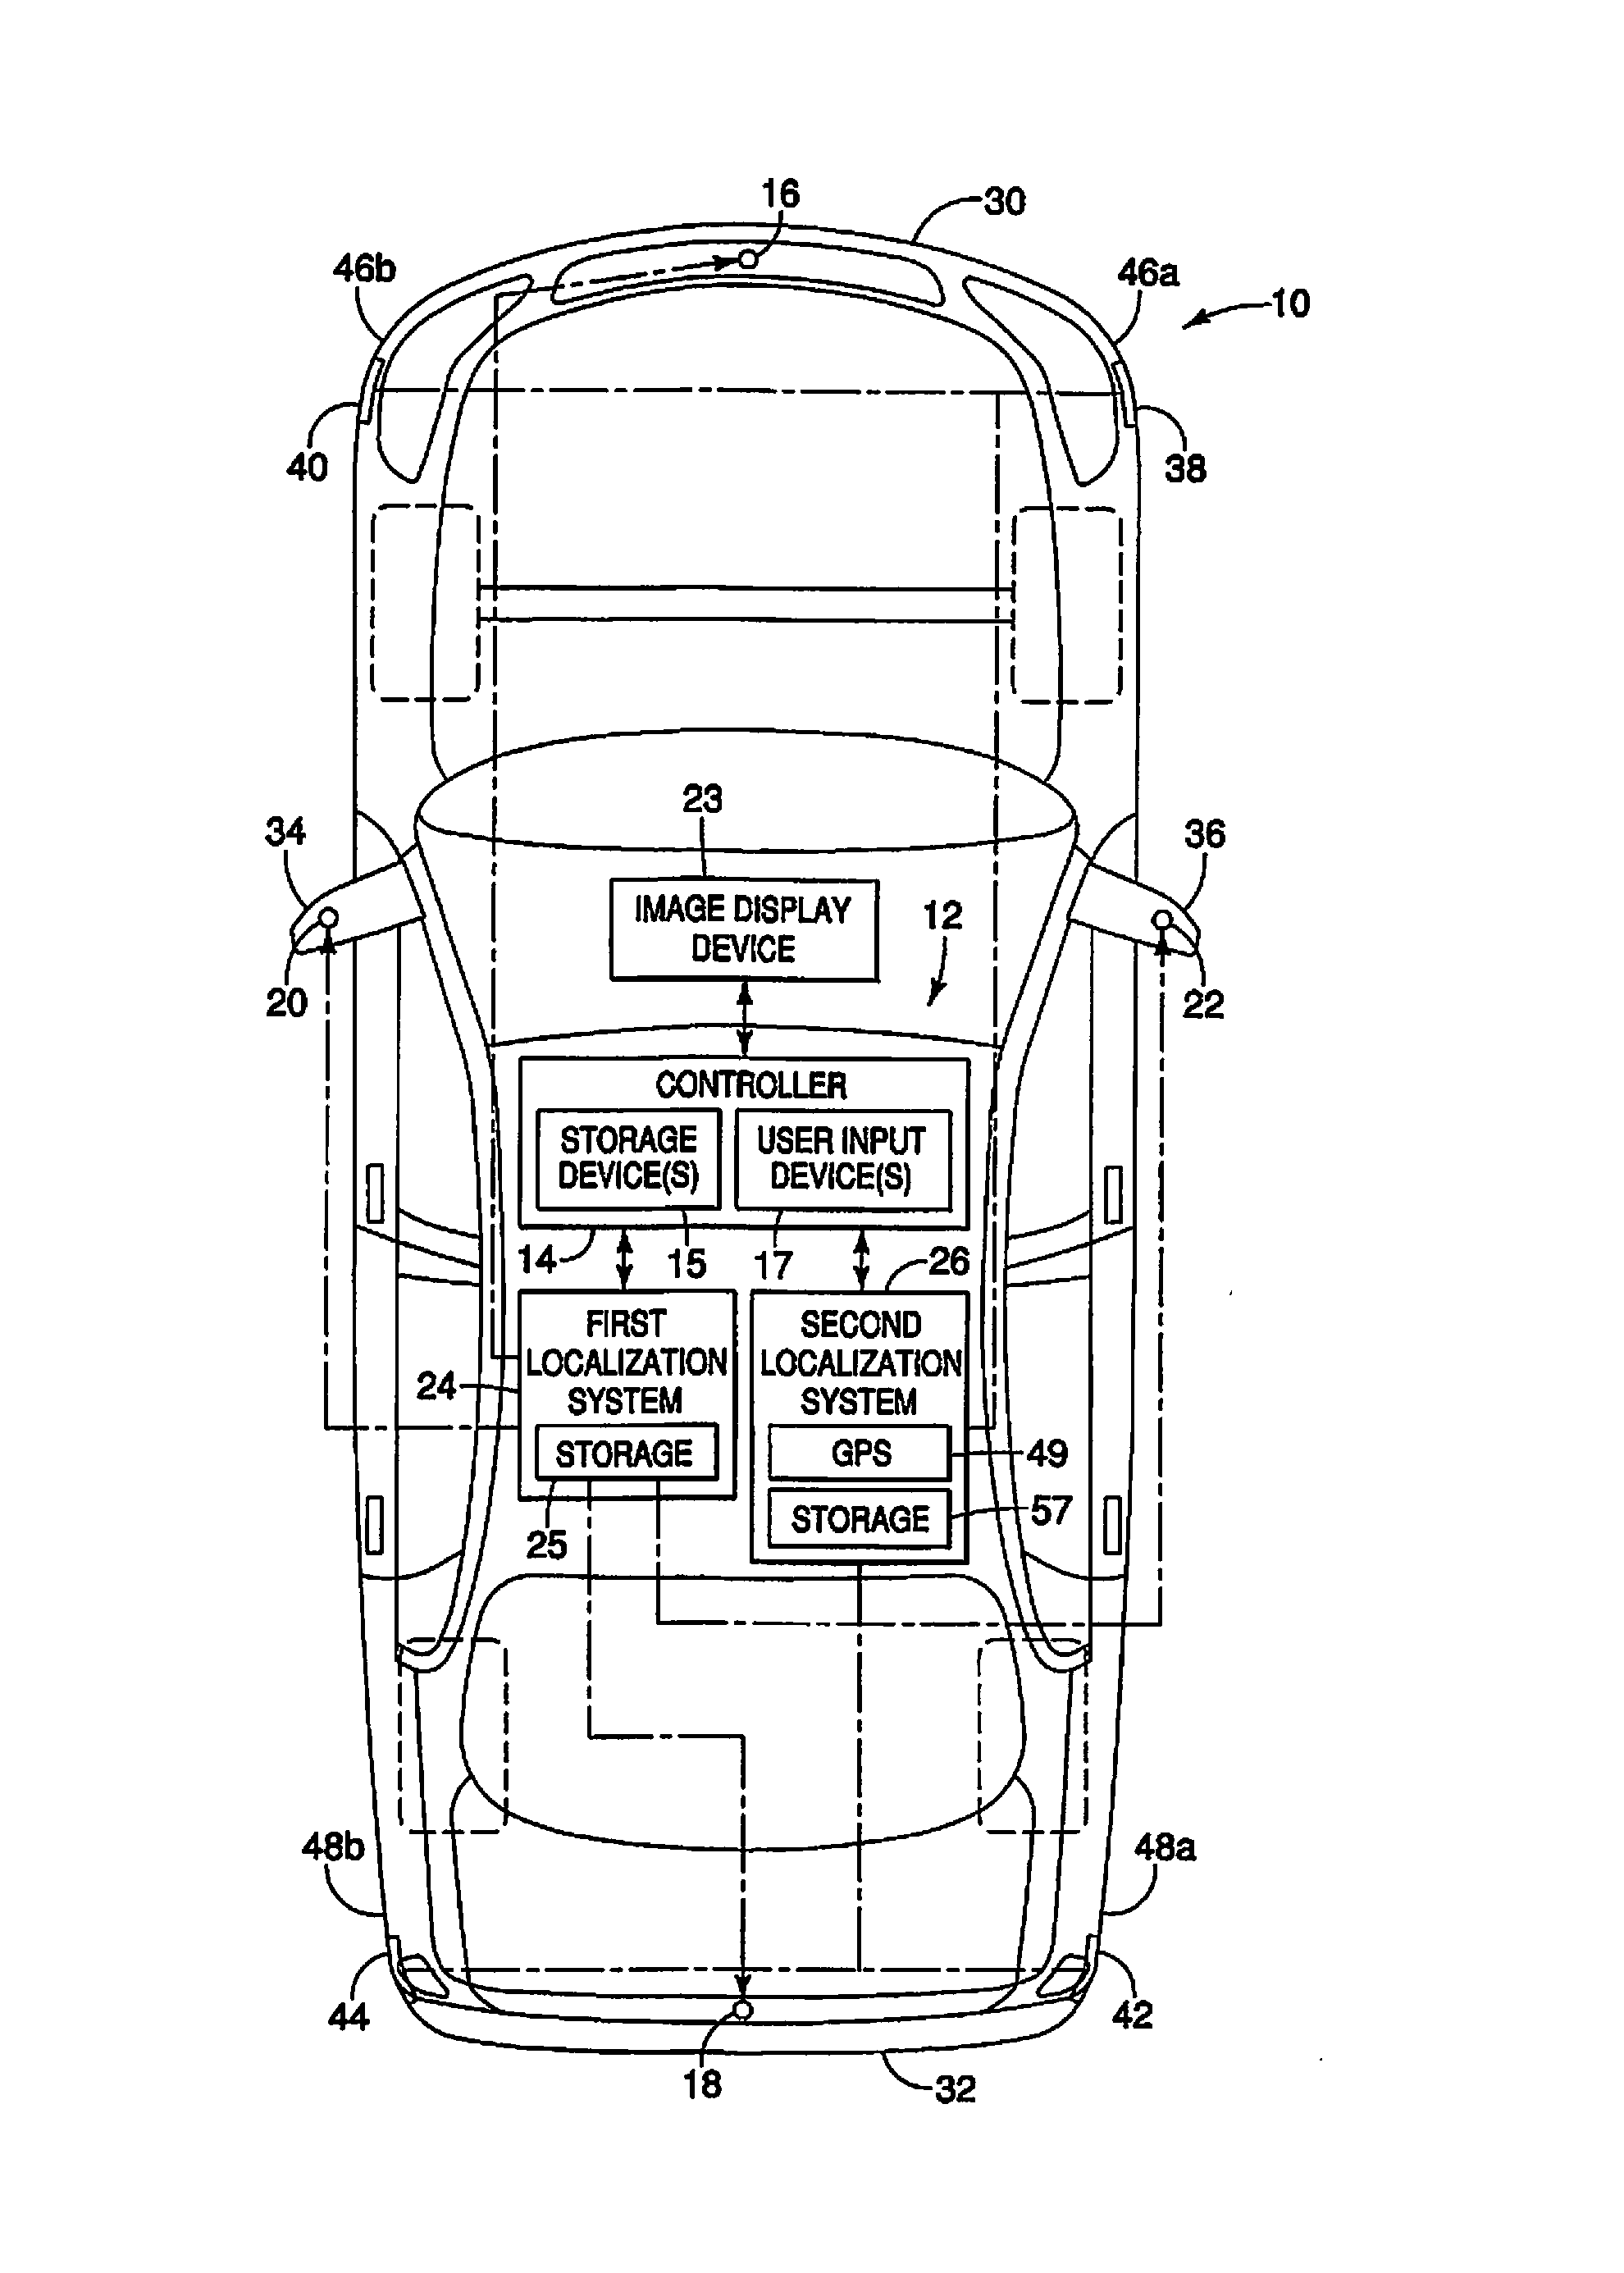 Vehicle localization system